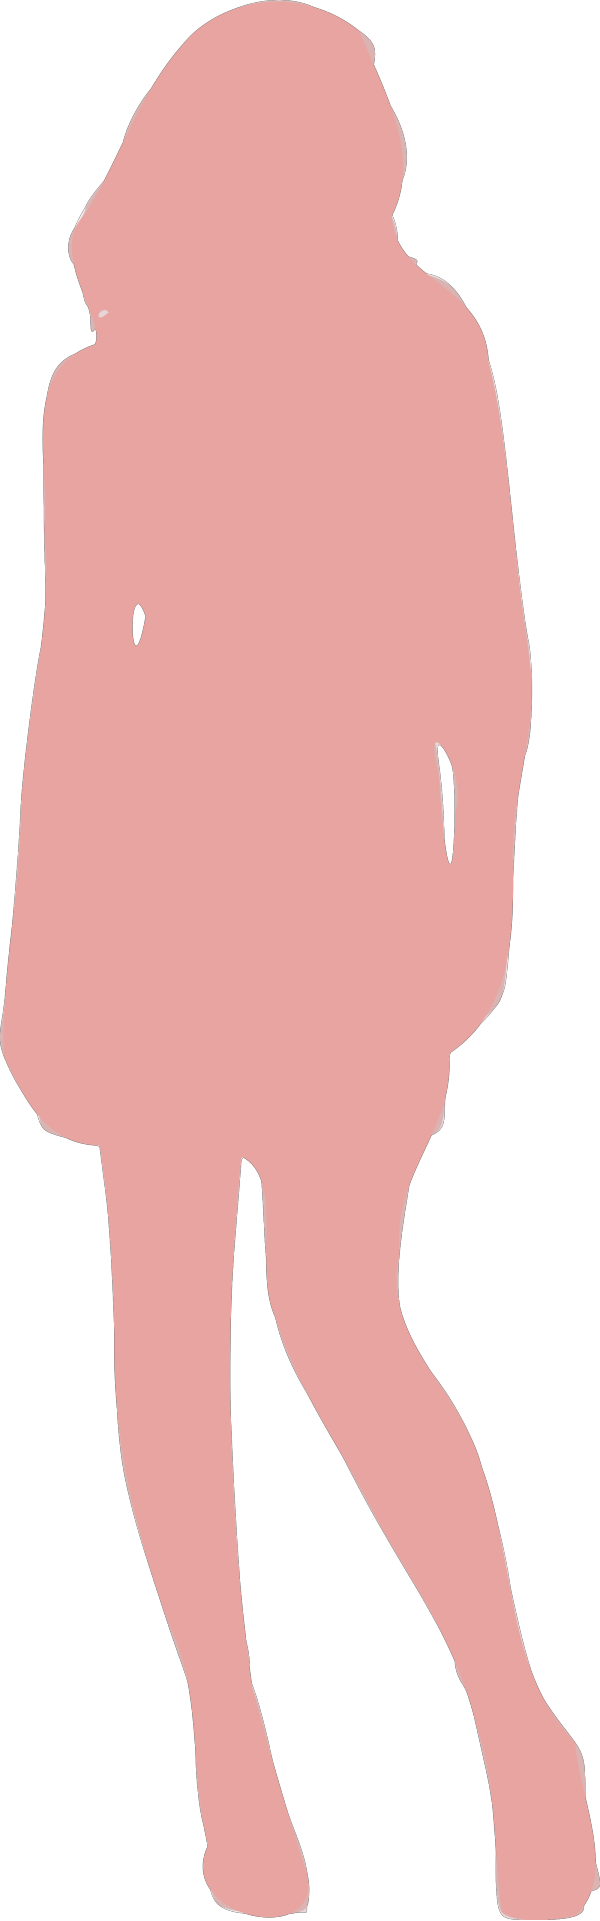 Person In Pink PNG Clip art